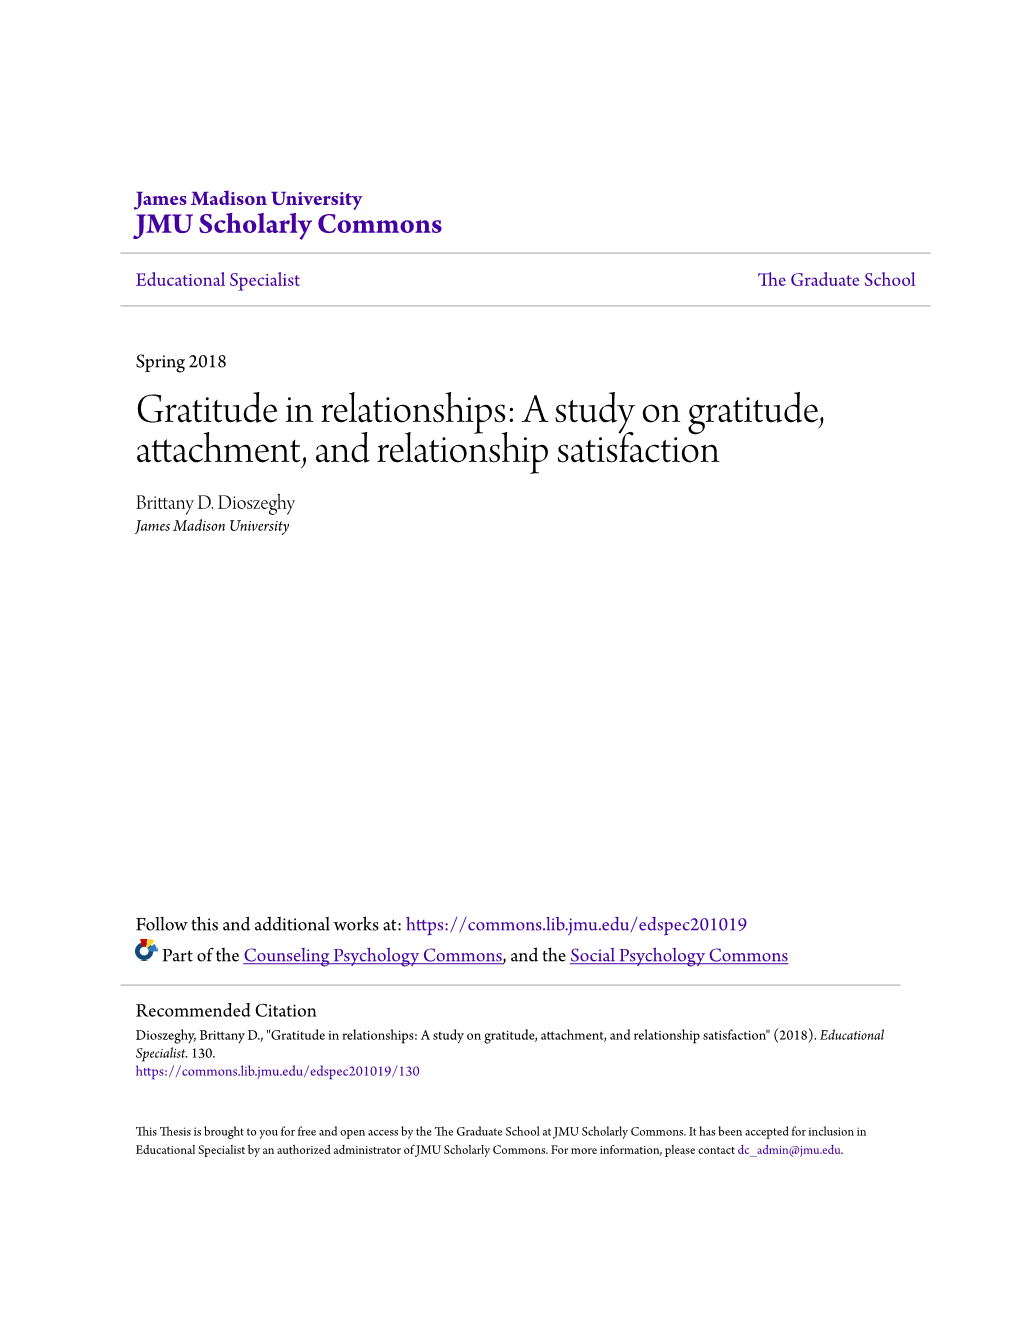 A Study on Gratitude, Attachment, and Relationship Satisfaction Brittany D